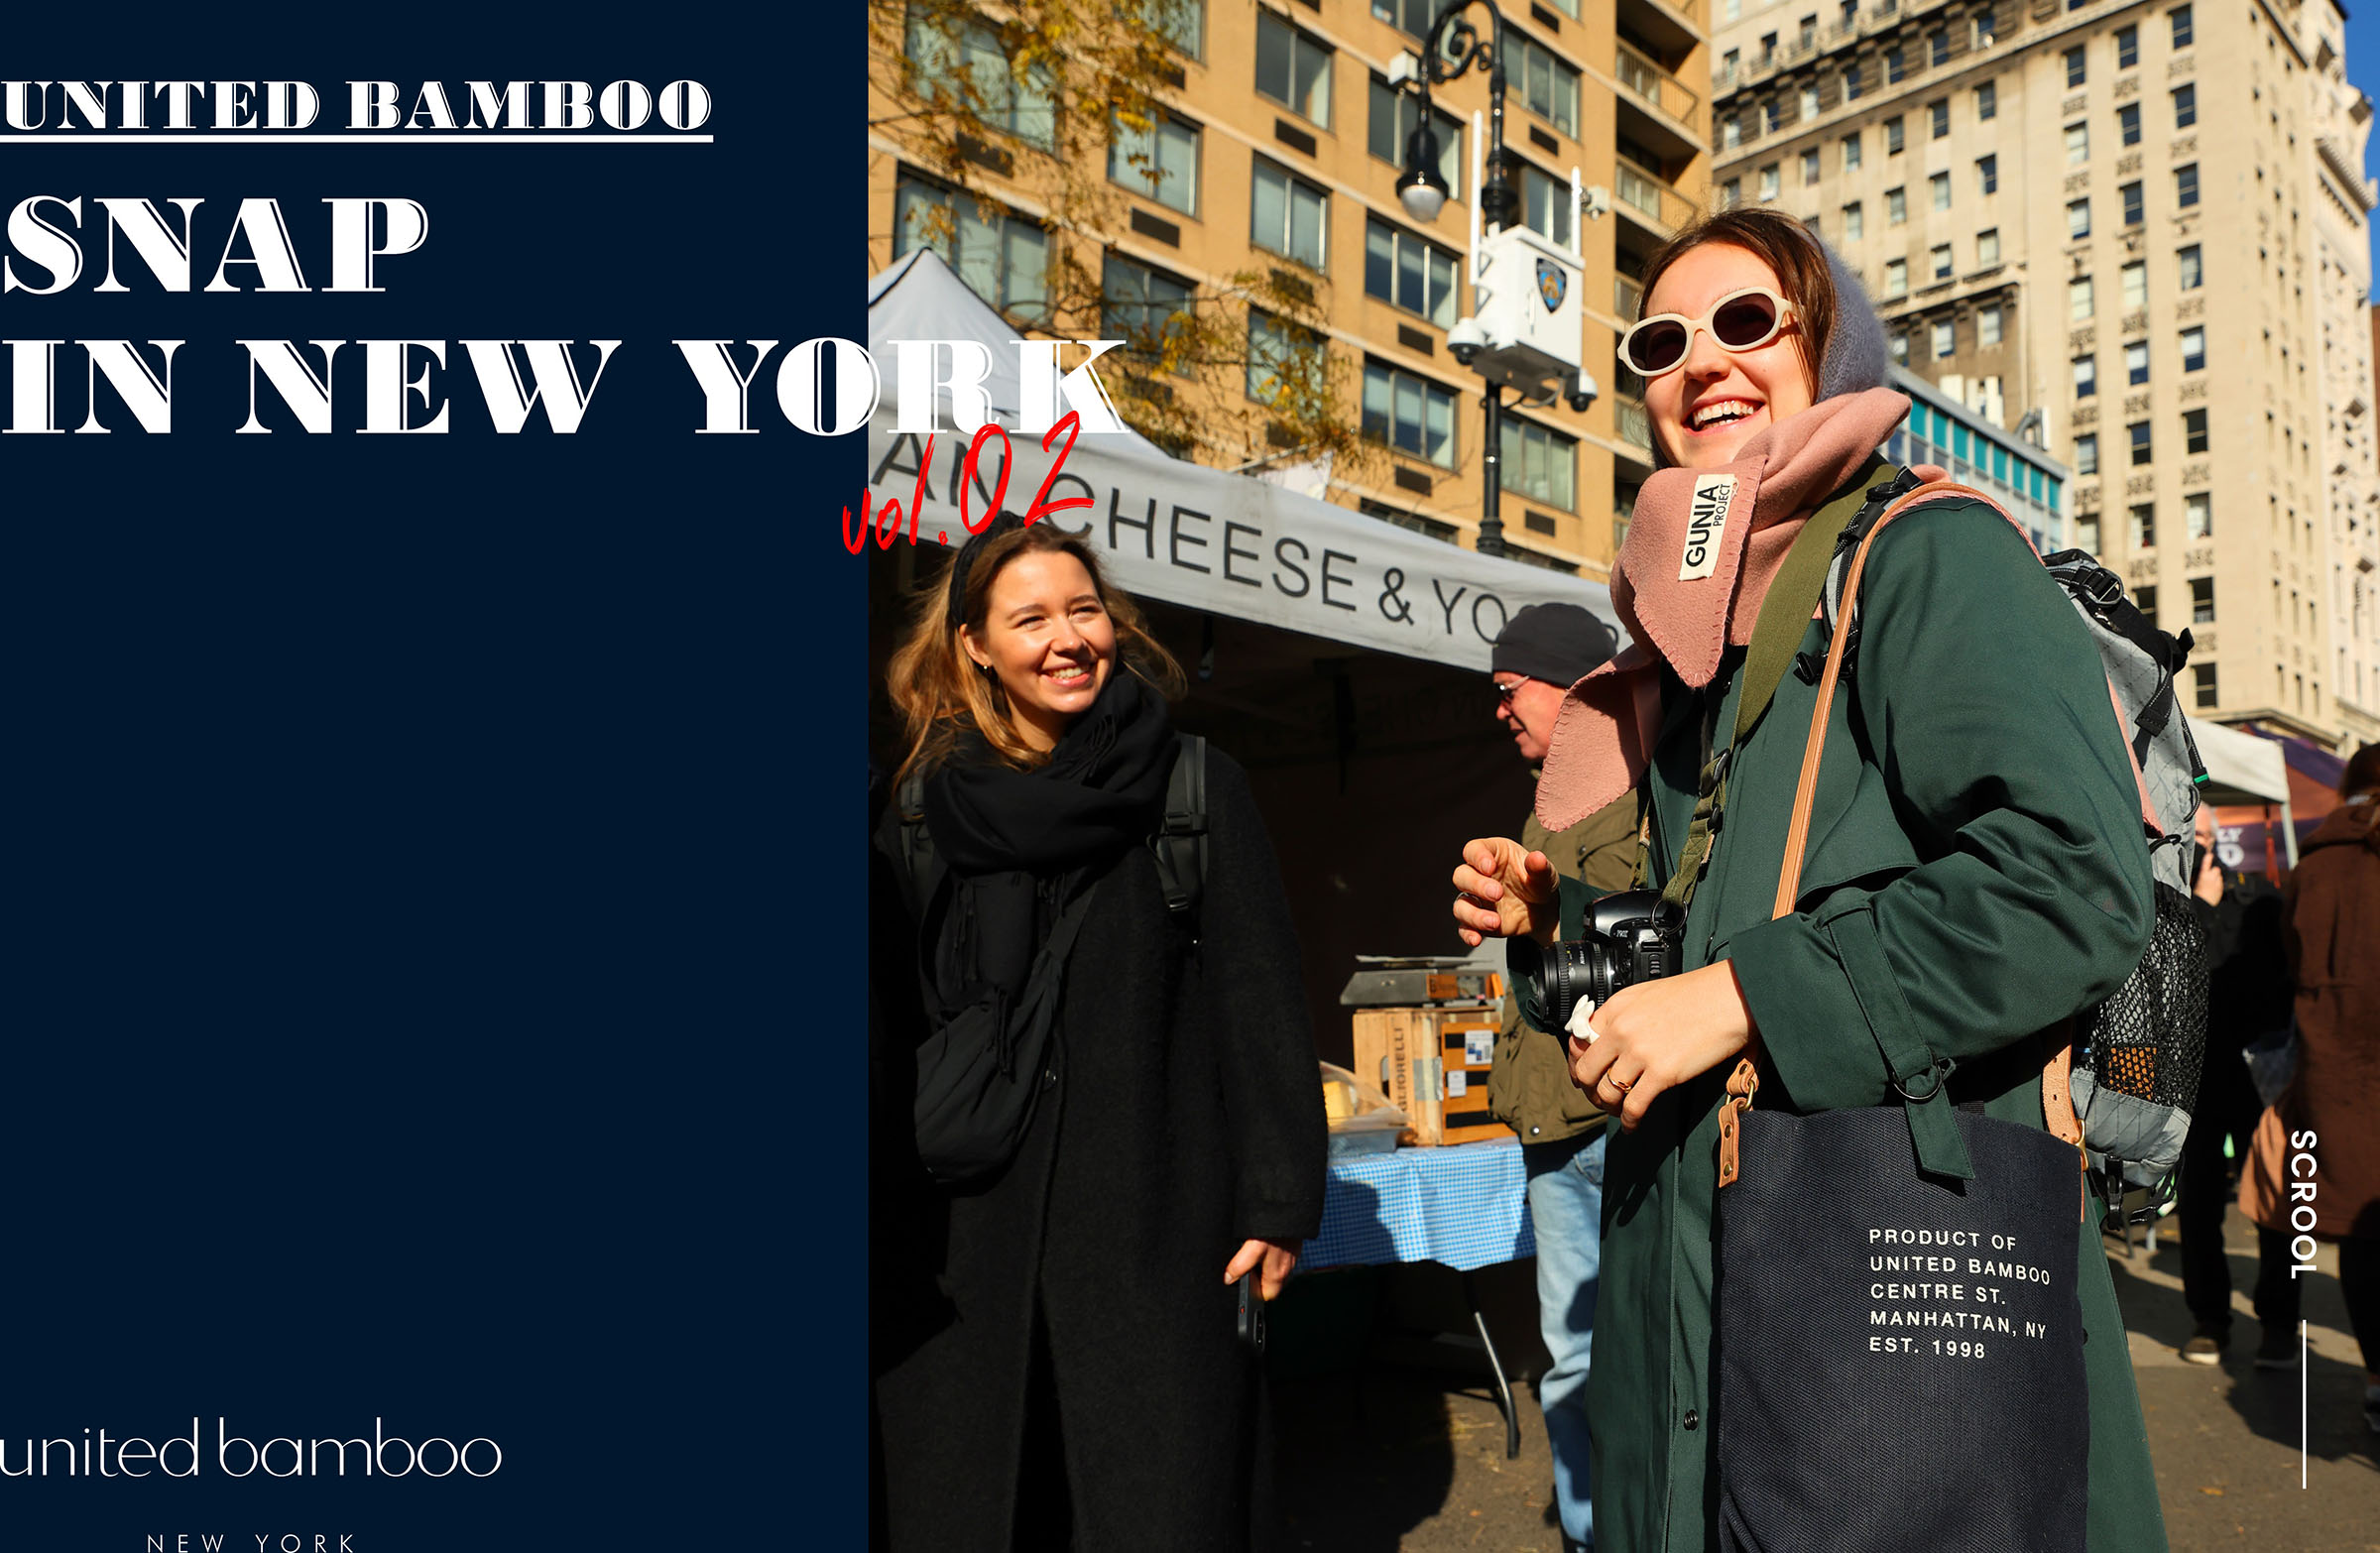 UNITED BAMBOO - SNAP IN NEW YORK vol.02